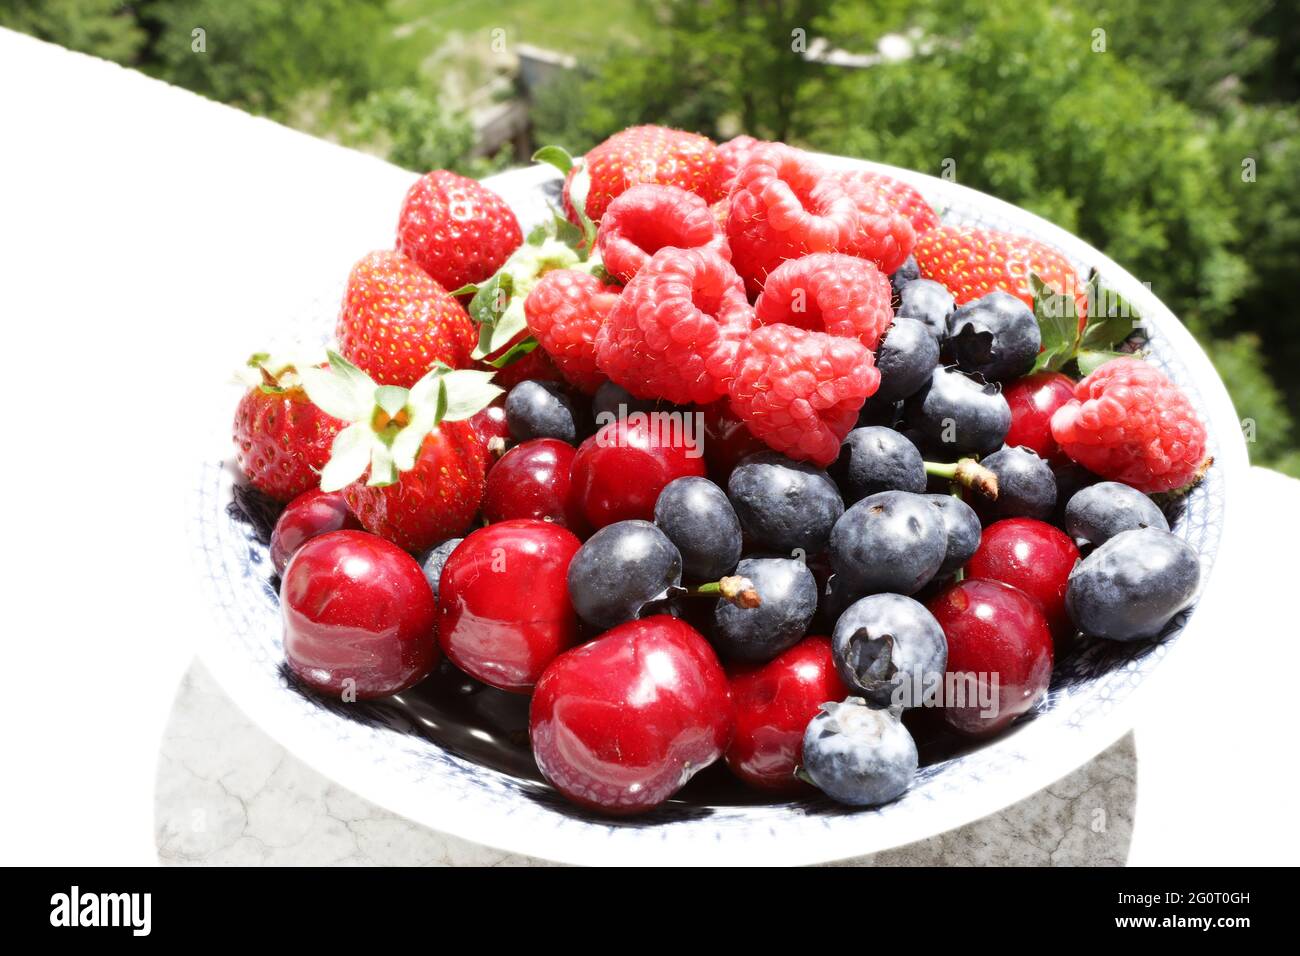 Fresh fruits and berries on daylight Stock Photo